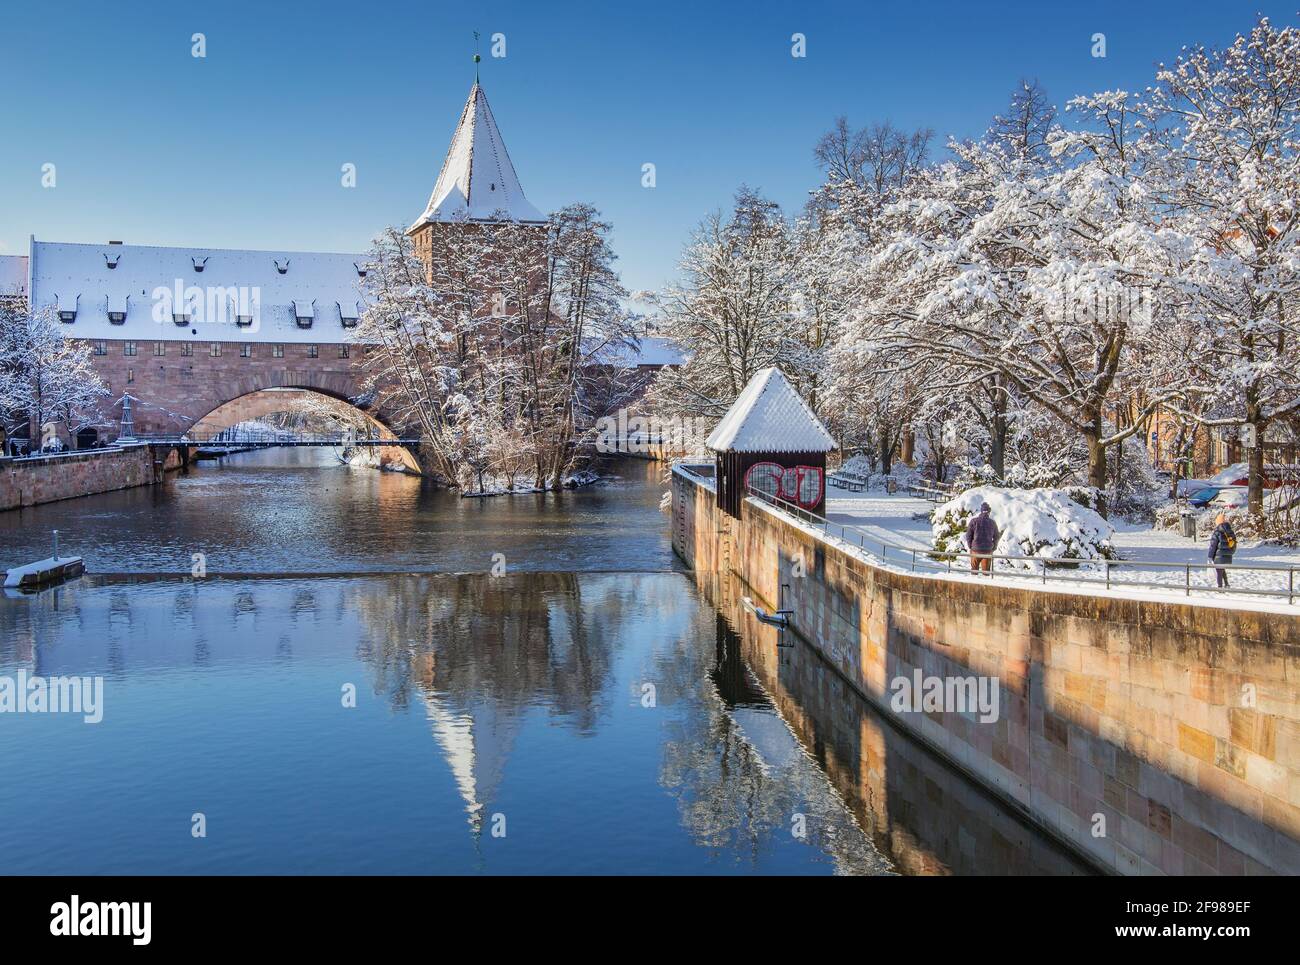 Pegnitz with Fronveste and Schlayerturm, Nuremberg, old town, Middle Franconia, Franconia, Bavaria, Germany Stock Photo